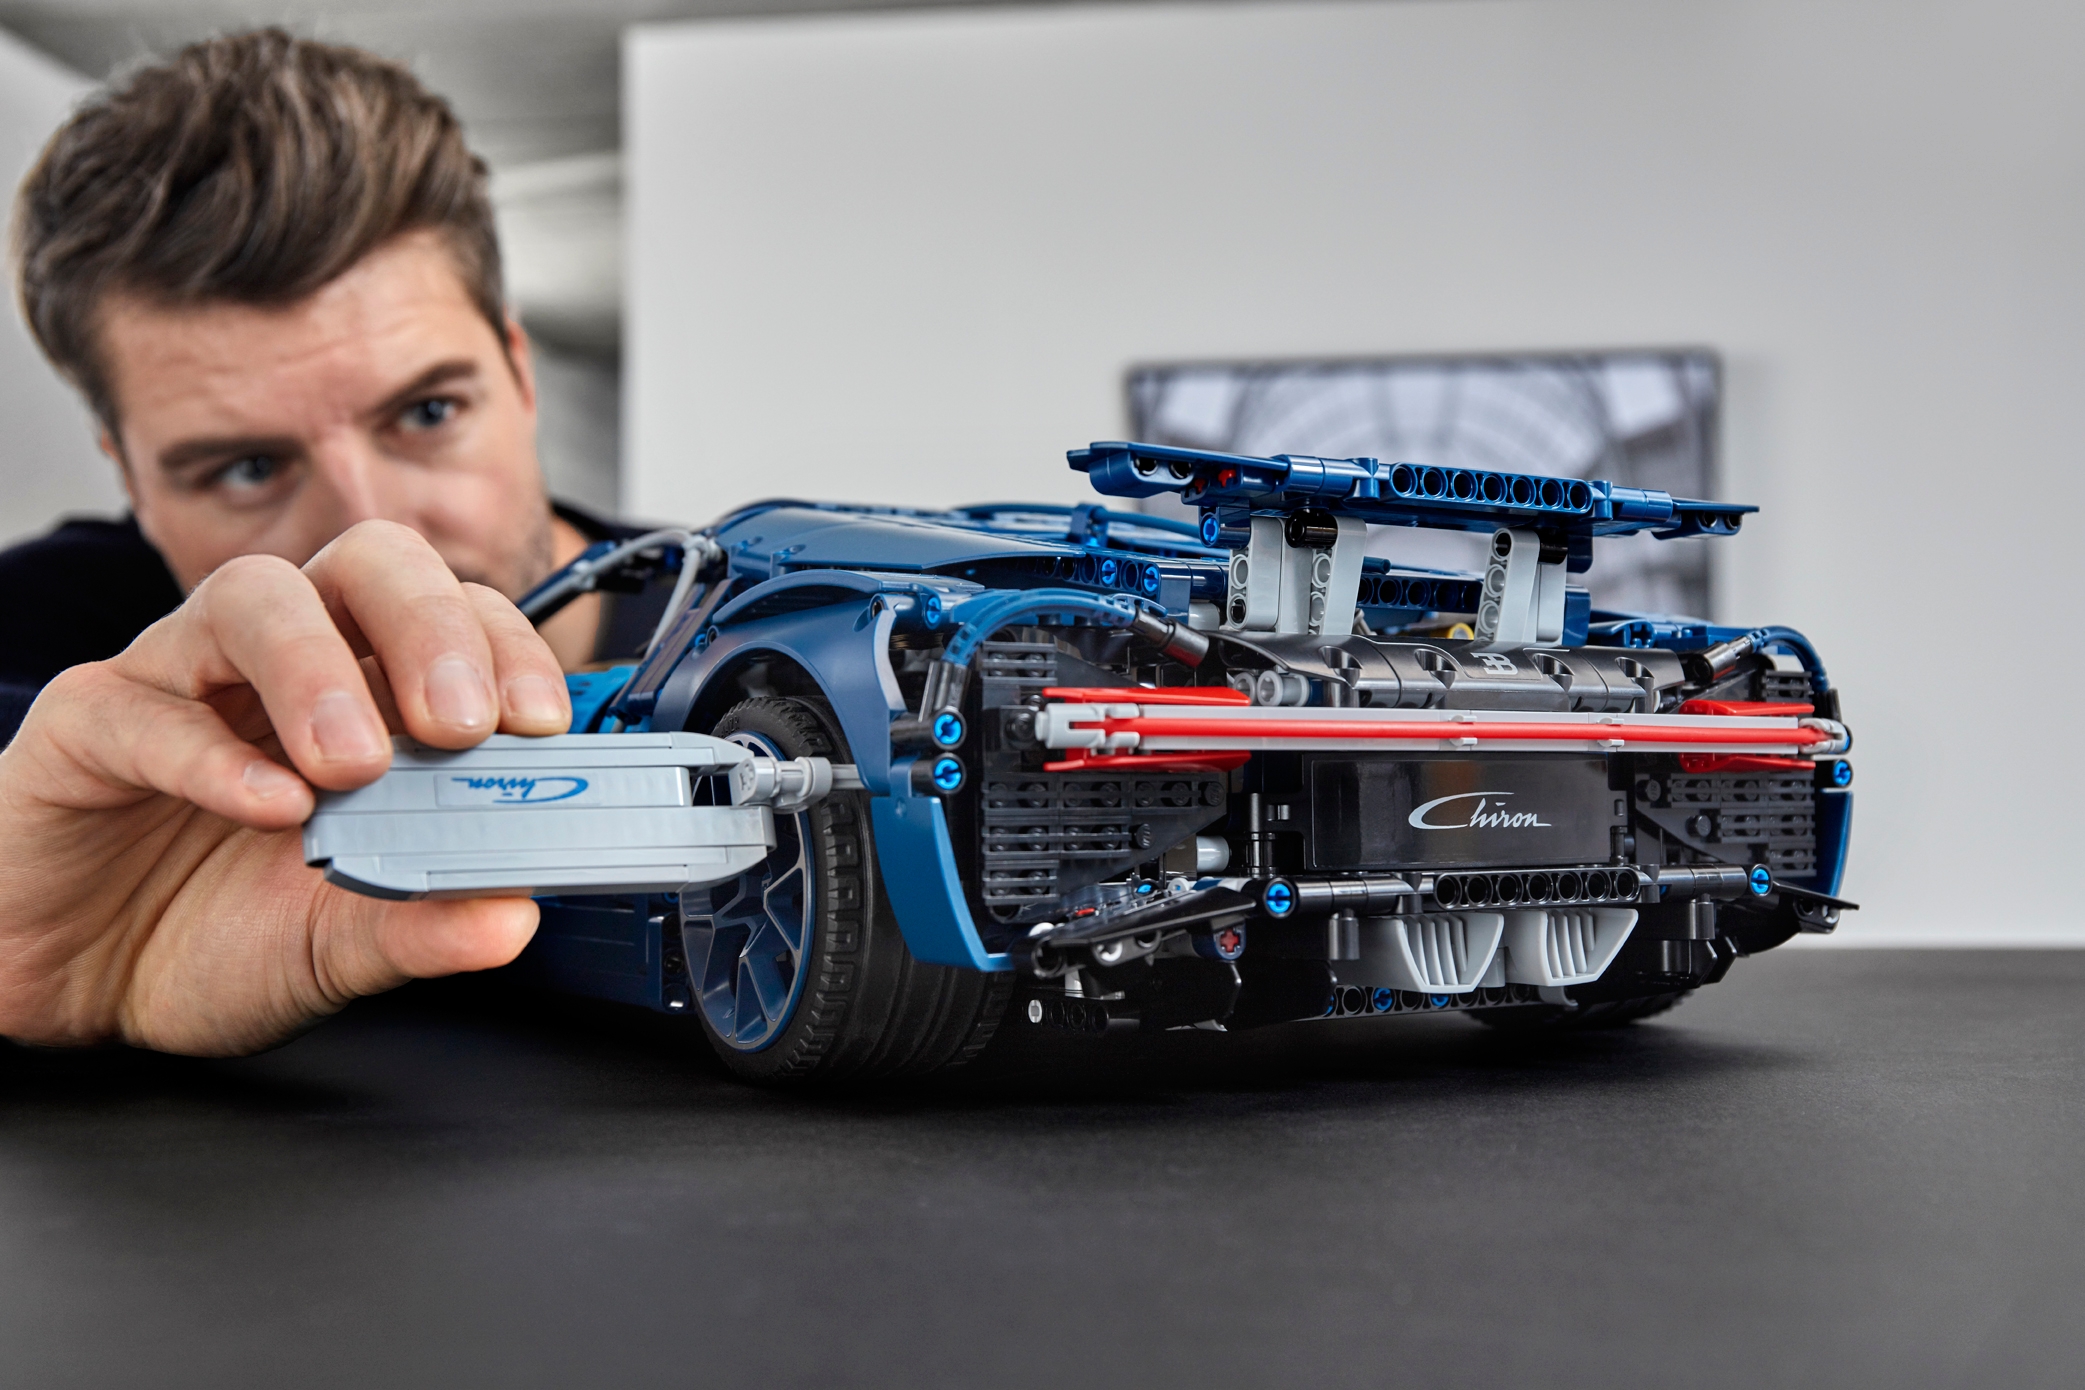 Bugatti Chiron 42083 | Technic™ | Buy online at the Official LEGO